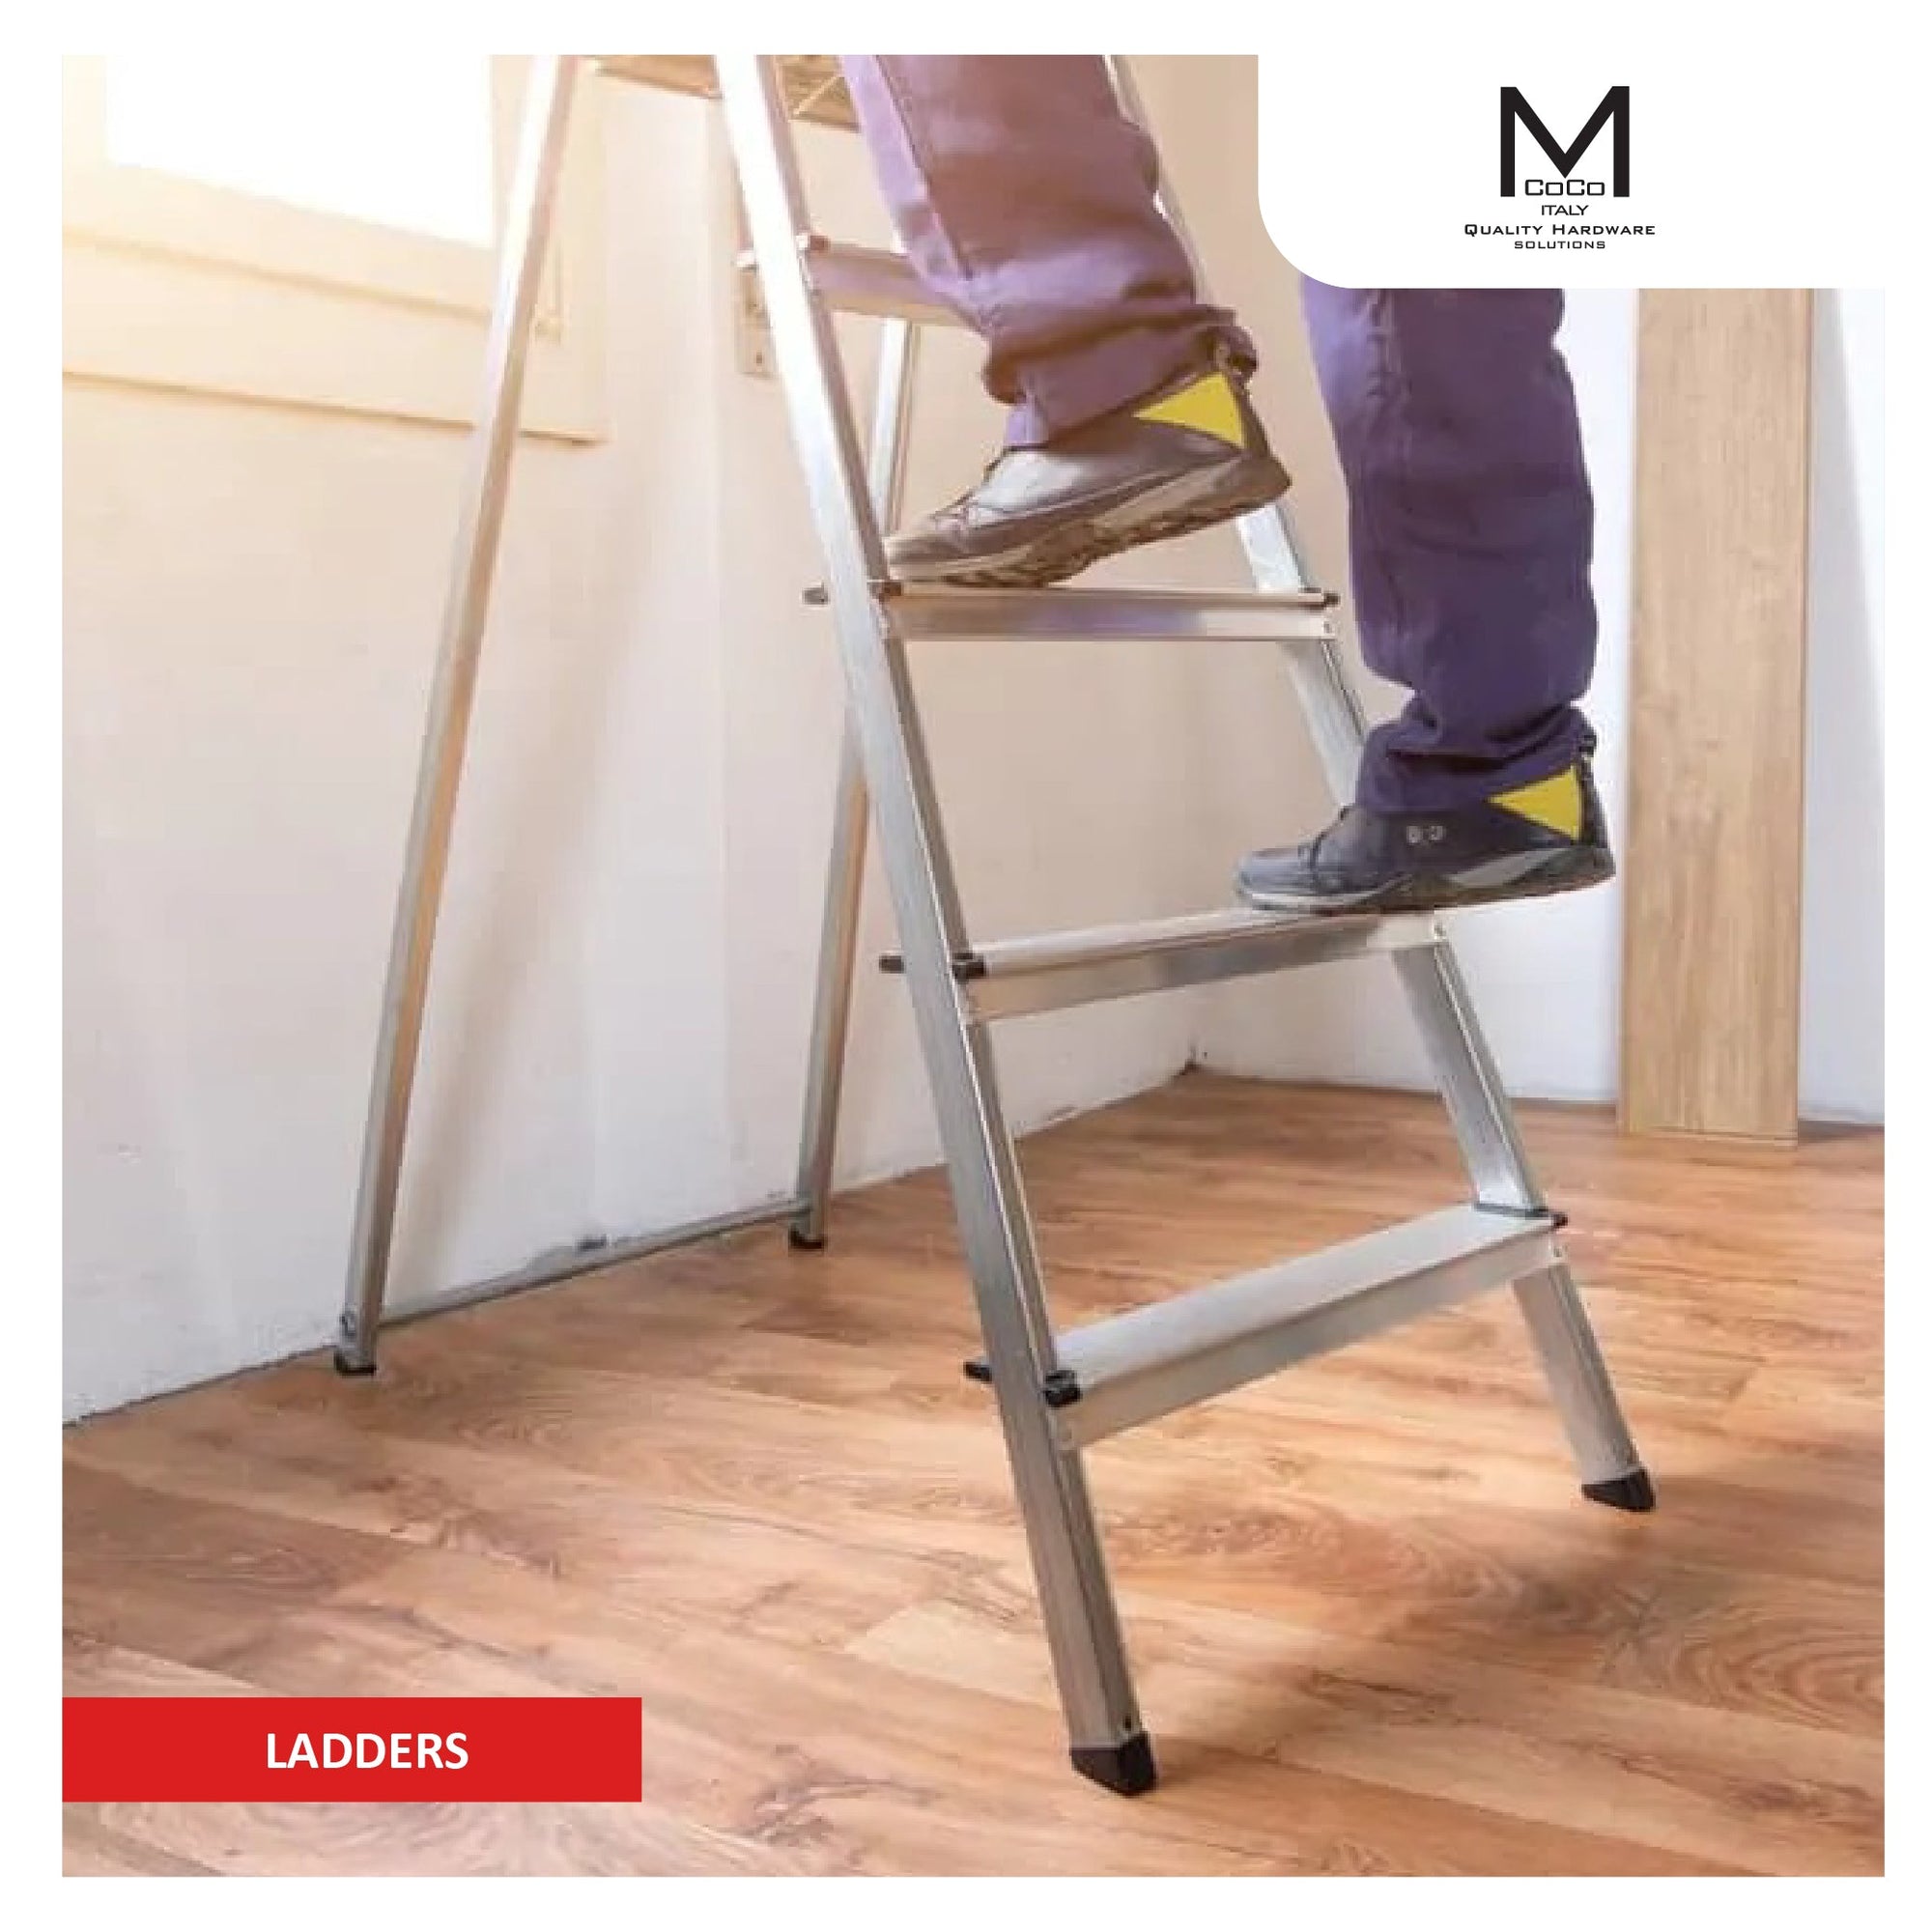 Mcoco Ladders - Versatile and Reliable Ladders for Easy Access and Efficient Work - M. M. Noorbhoy & Co.